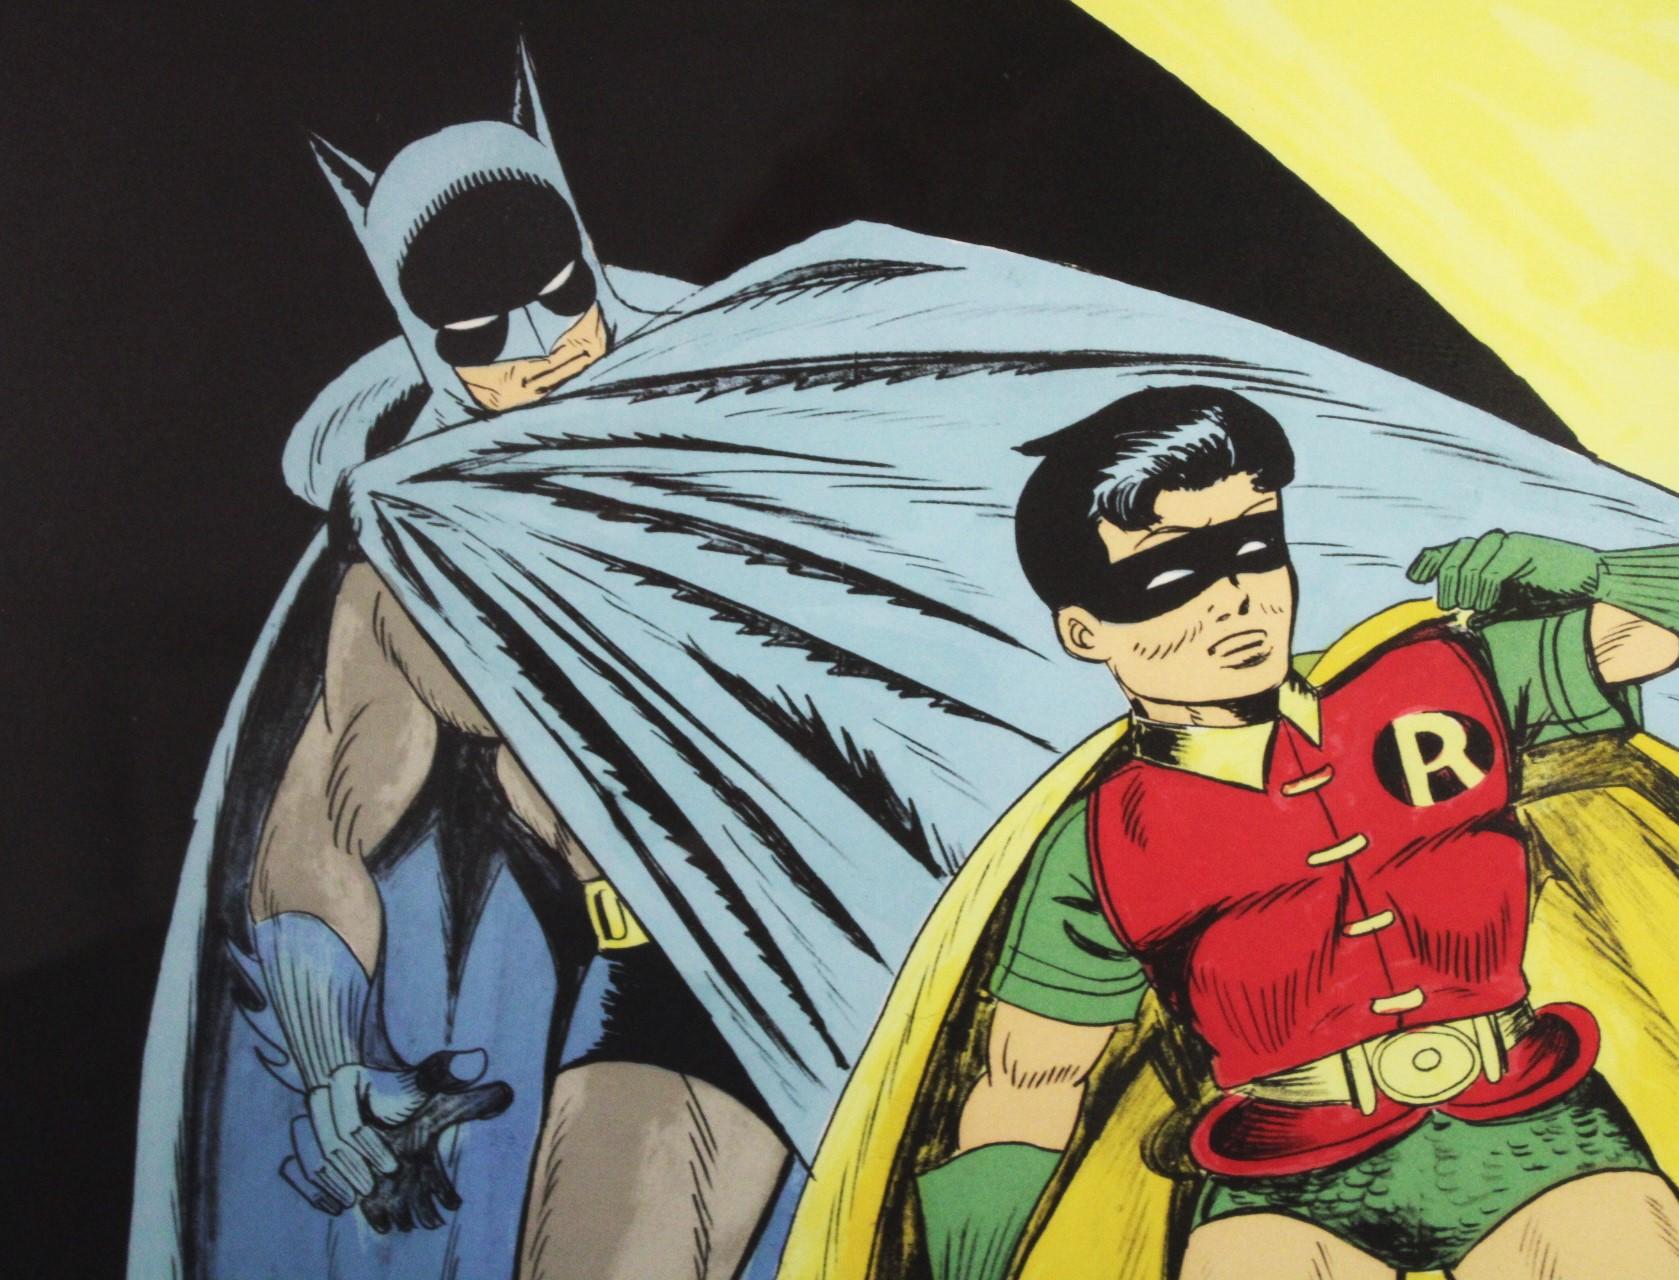 LIMITED EDITION OF THE DYNAMIC DUO LITHOGRAPH